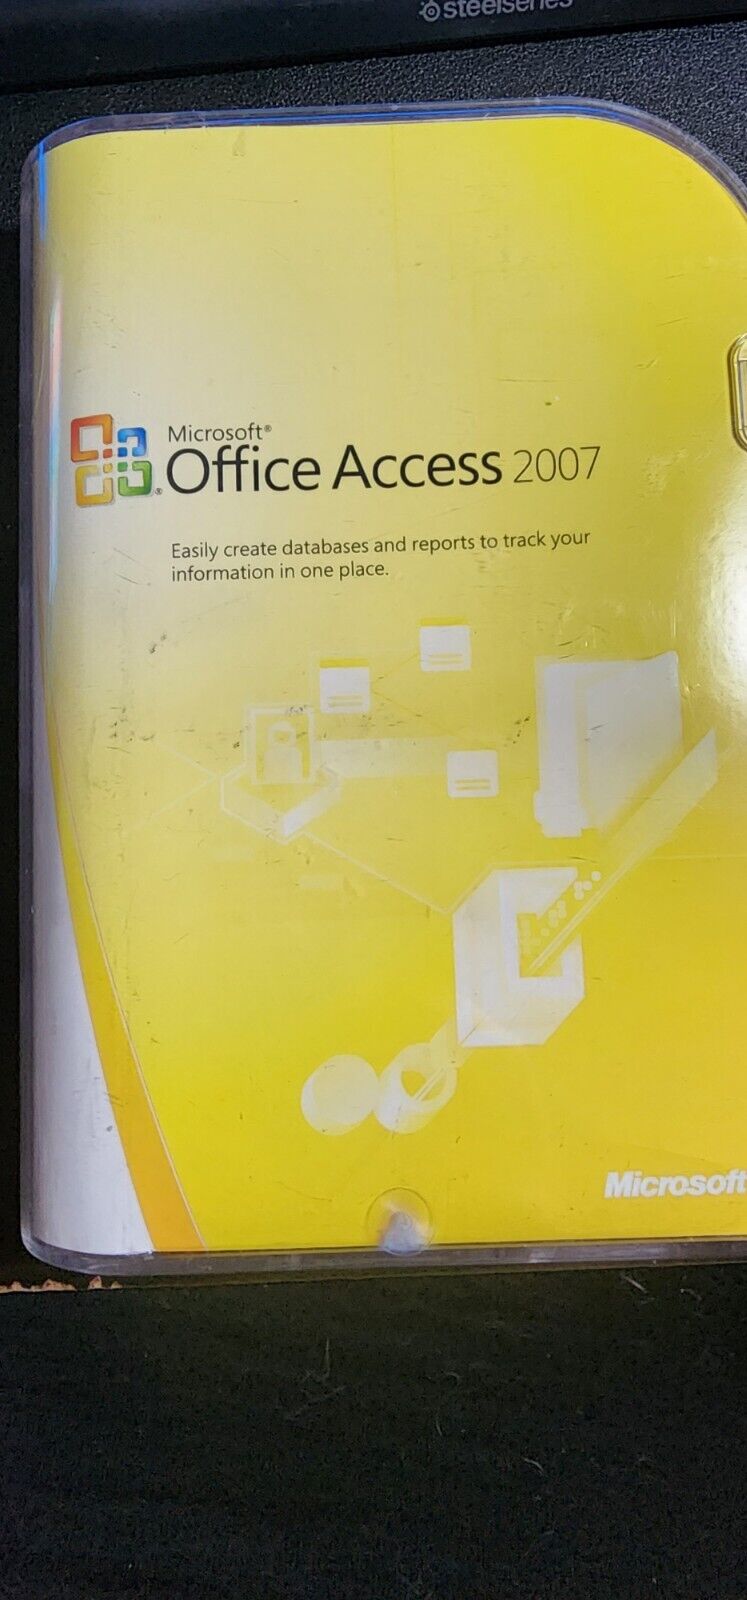 Microsoft Office Home and Student 2007 (79G-00007)